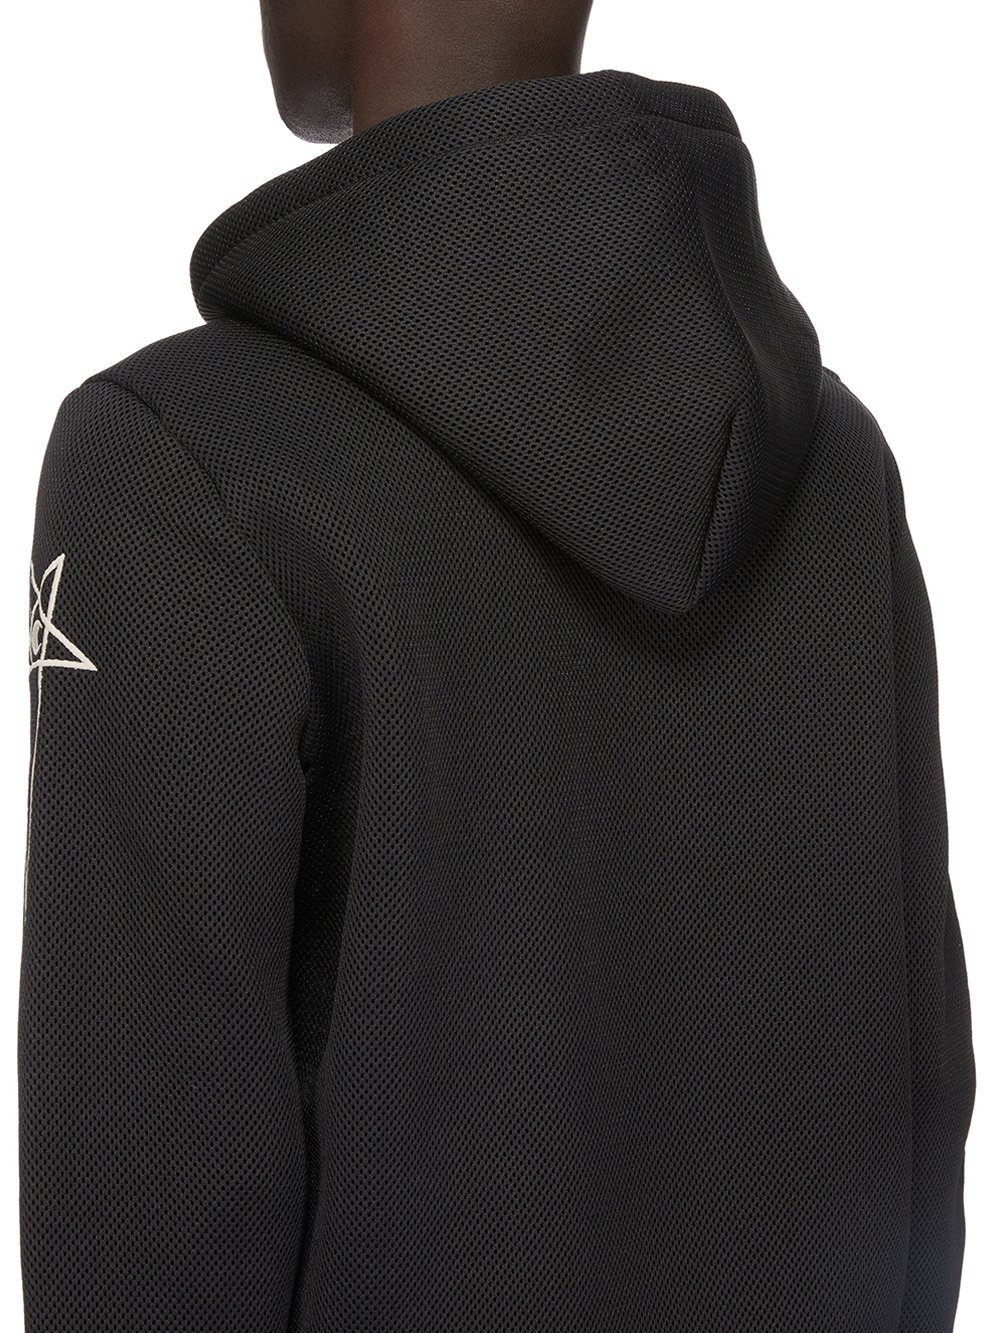 CHAMPION X RICK OWENS JASON'S HOODIE IN BLACK RECYCLED 3D MESH